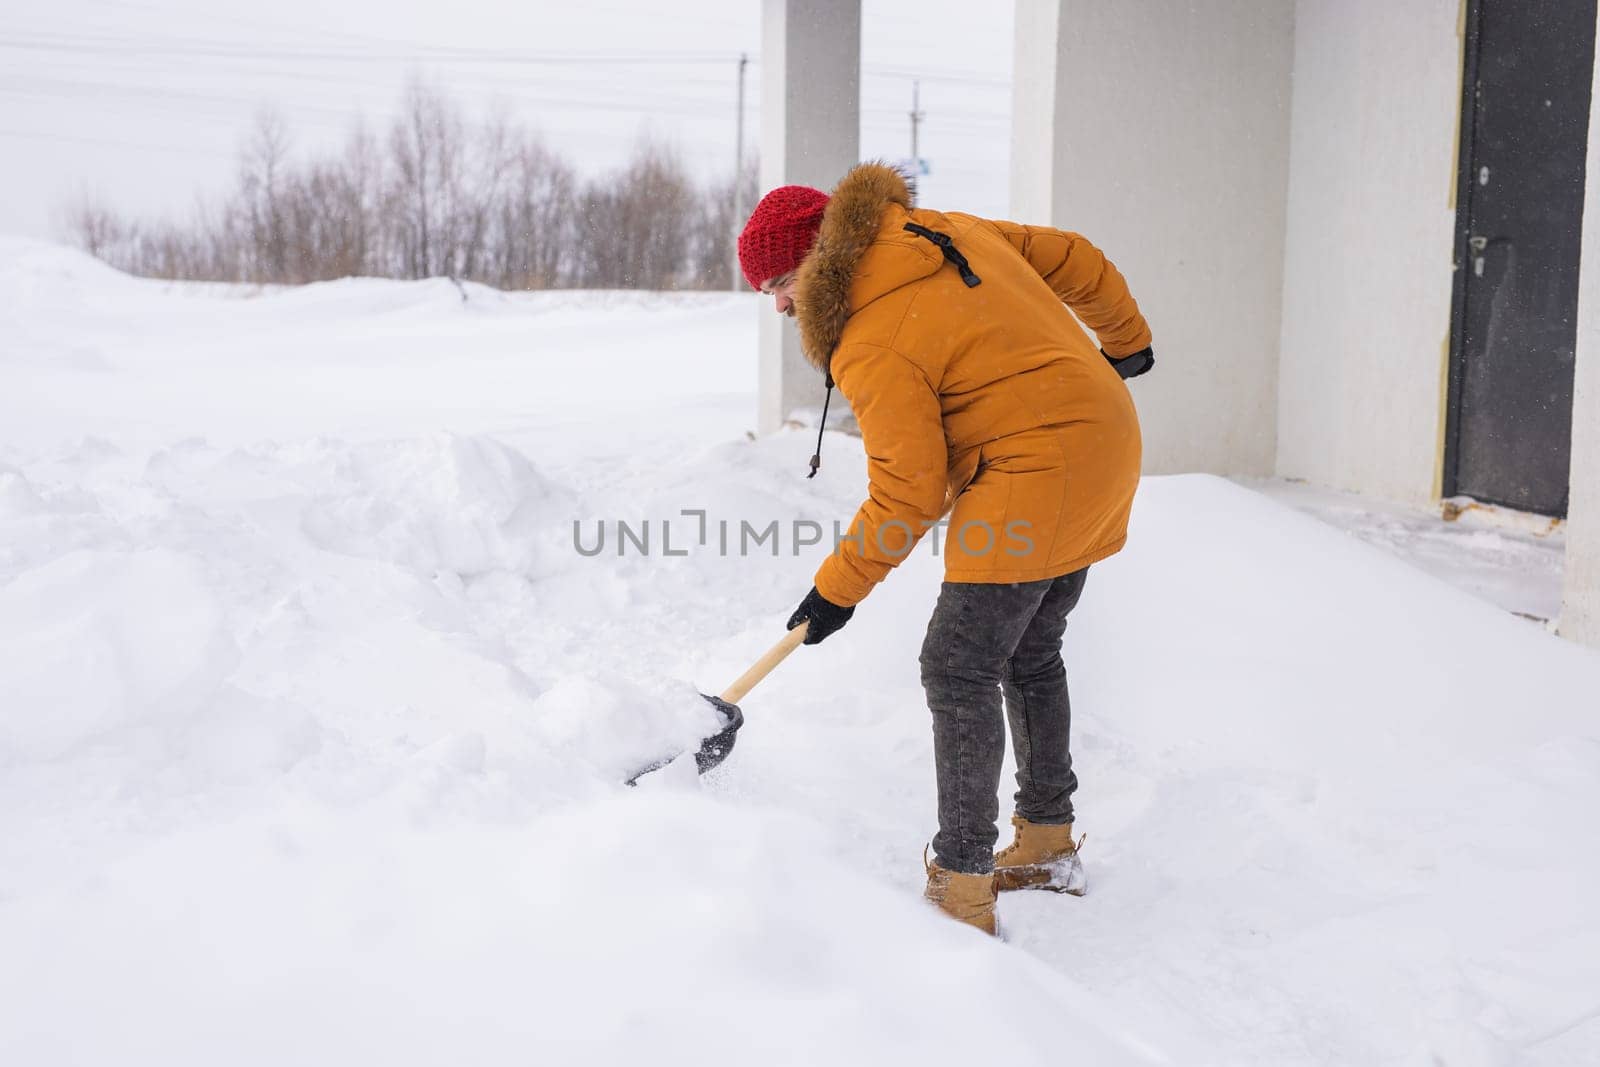 Man removing snow and ice from the sidewalk in front of house. Winter season by Satura86